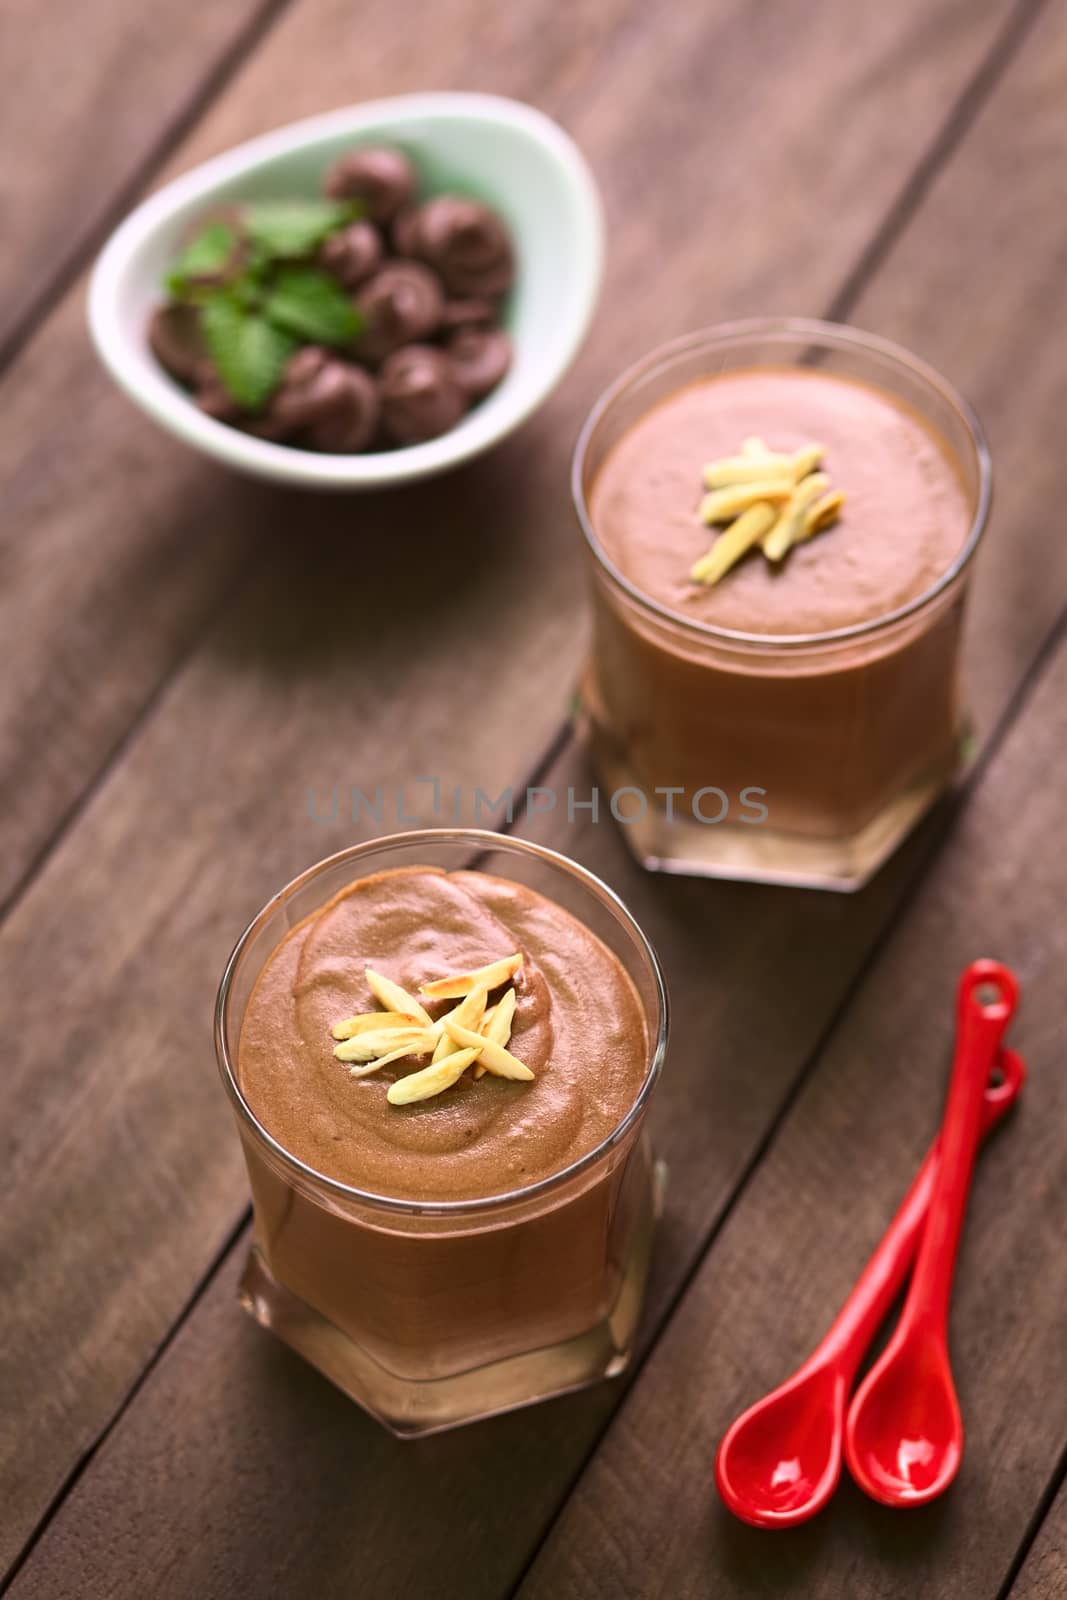 French dessert called Mousse au Chocolat, made of melted chocolate, egg, cream and sugar served in glasses and garnished with roasted almond pieces (Selective Focus, Focus on the front of the almond pieces on the first dessert)